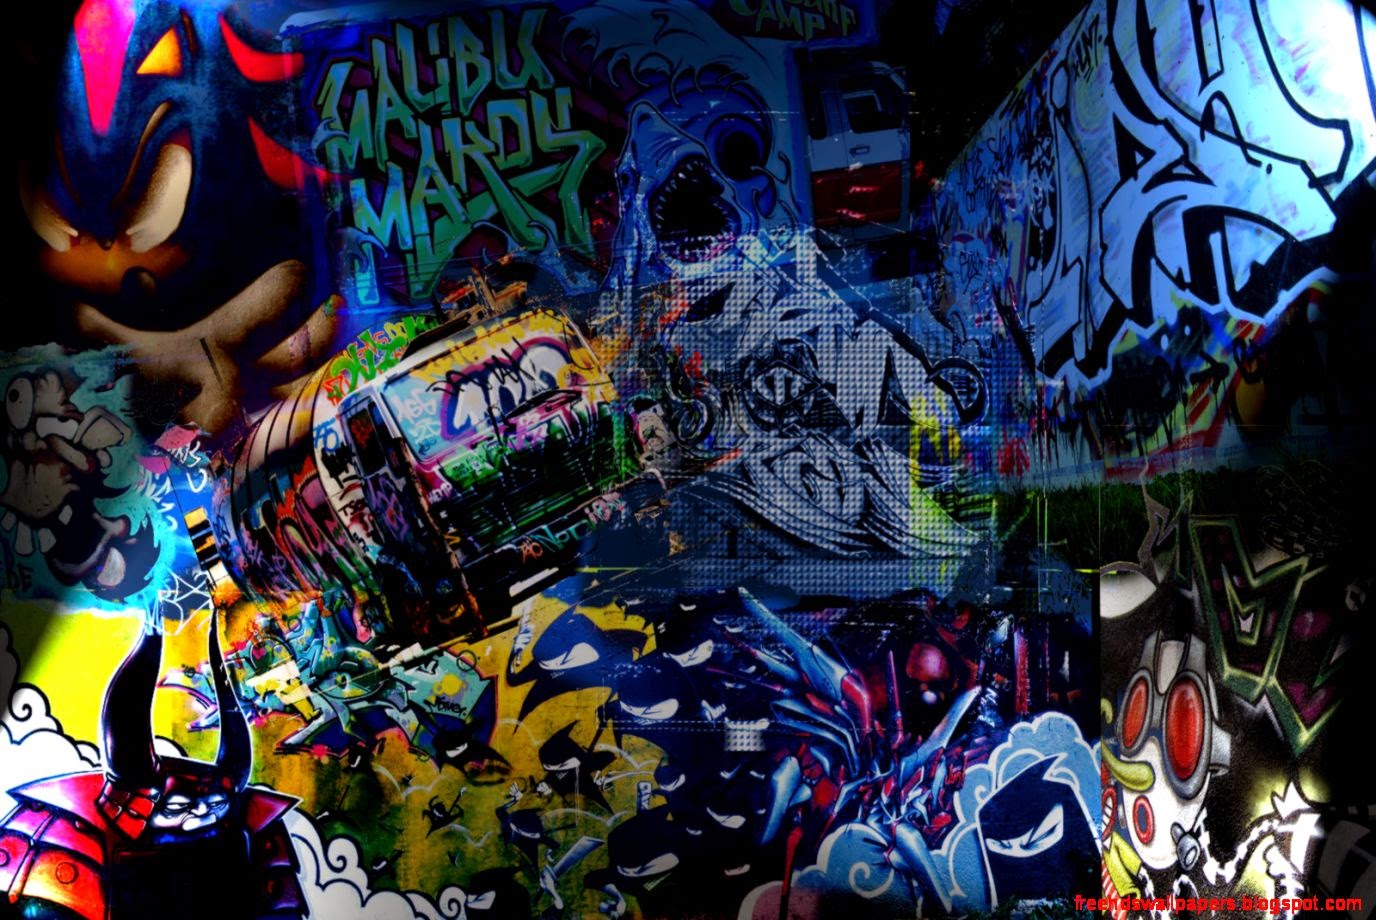 Graffiti wallpapers - Free A4 fonts HD Desktop background images pictures downloads